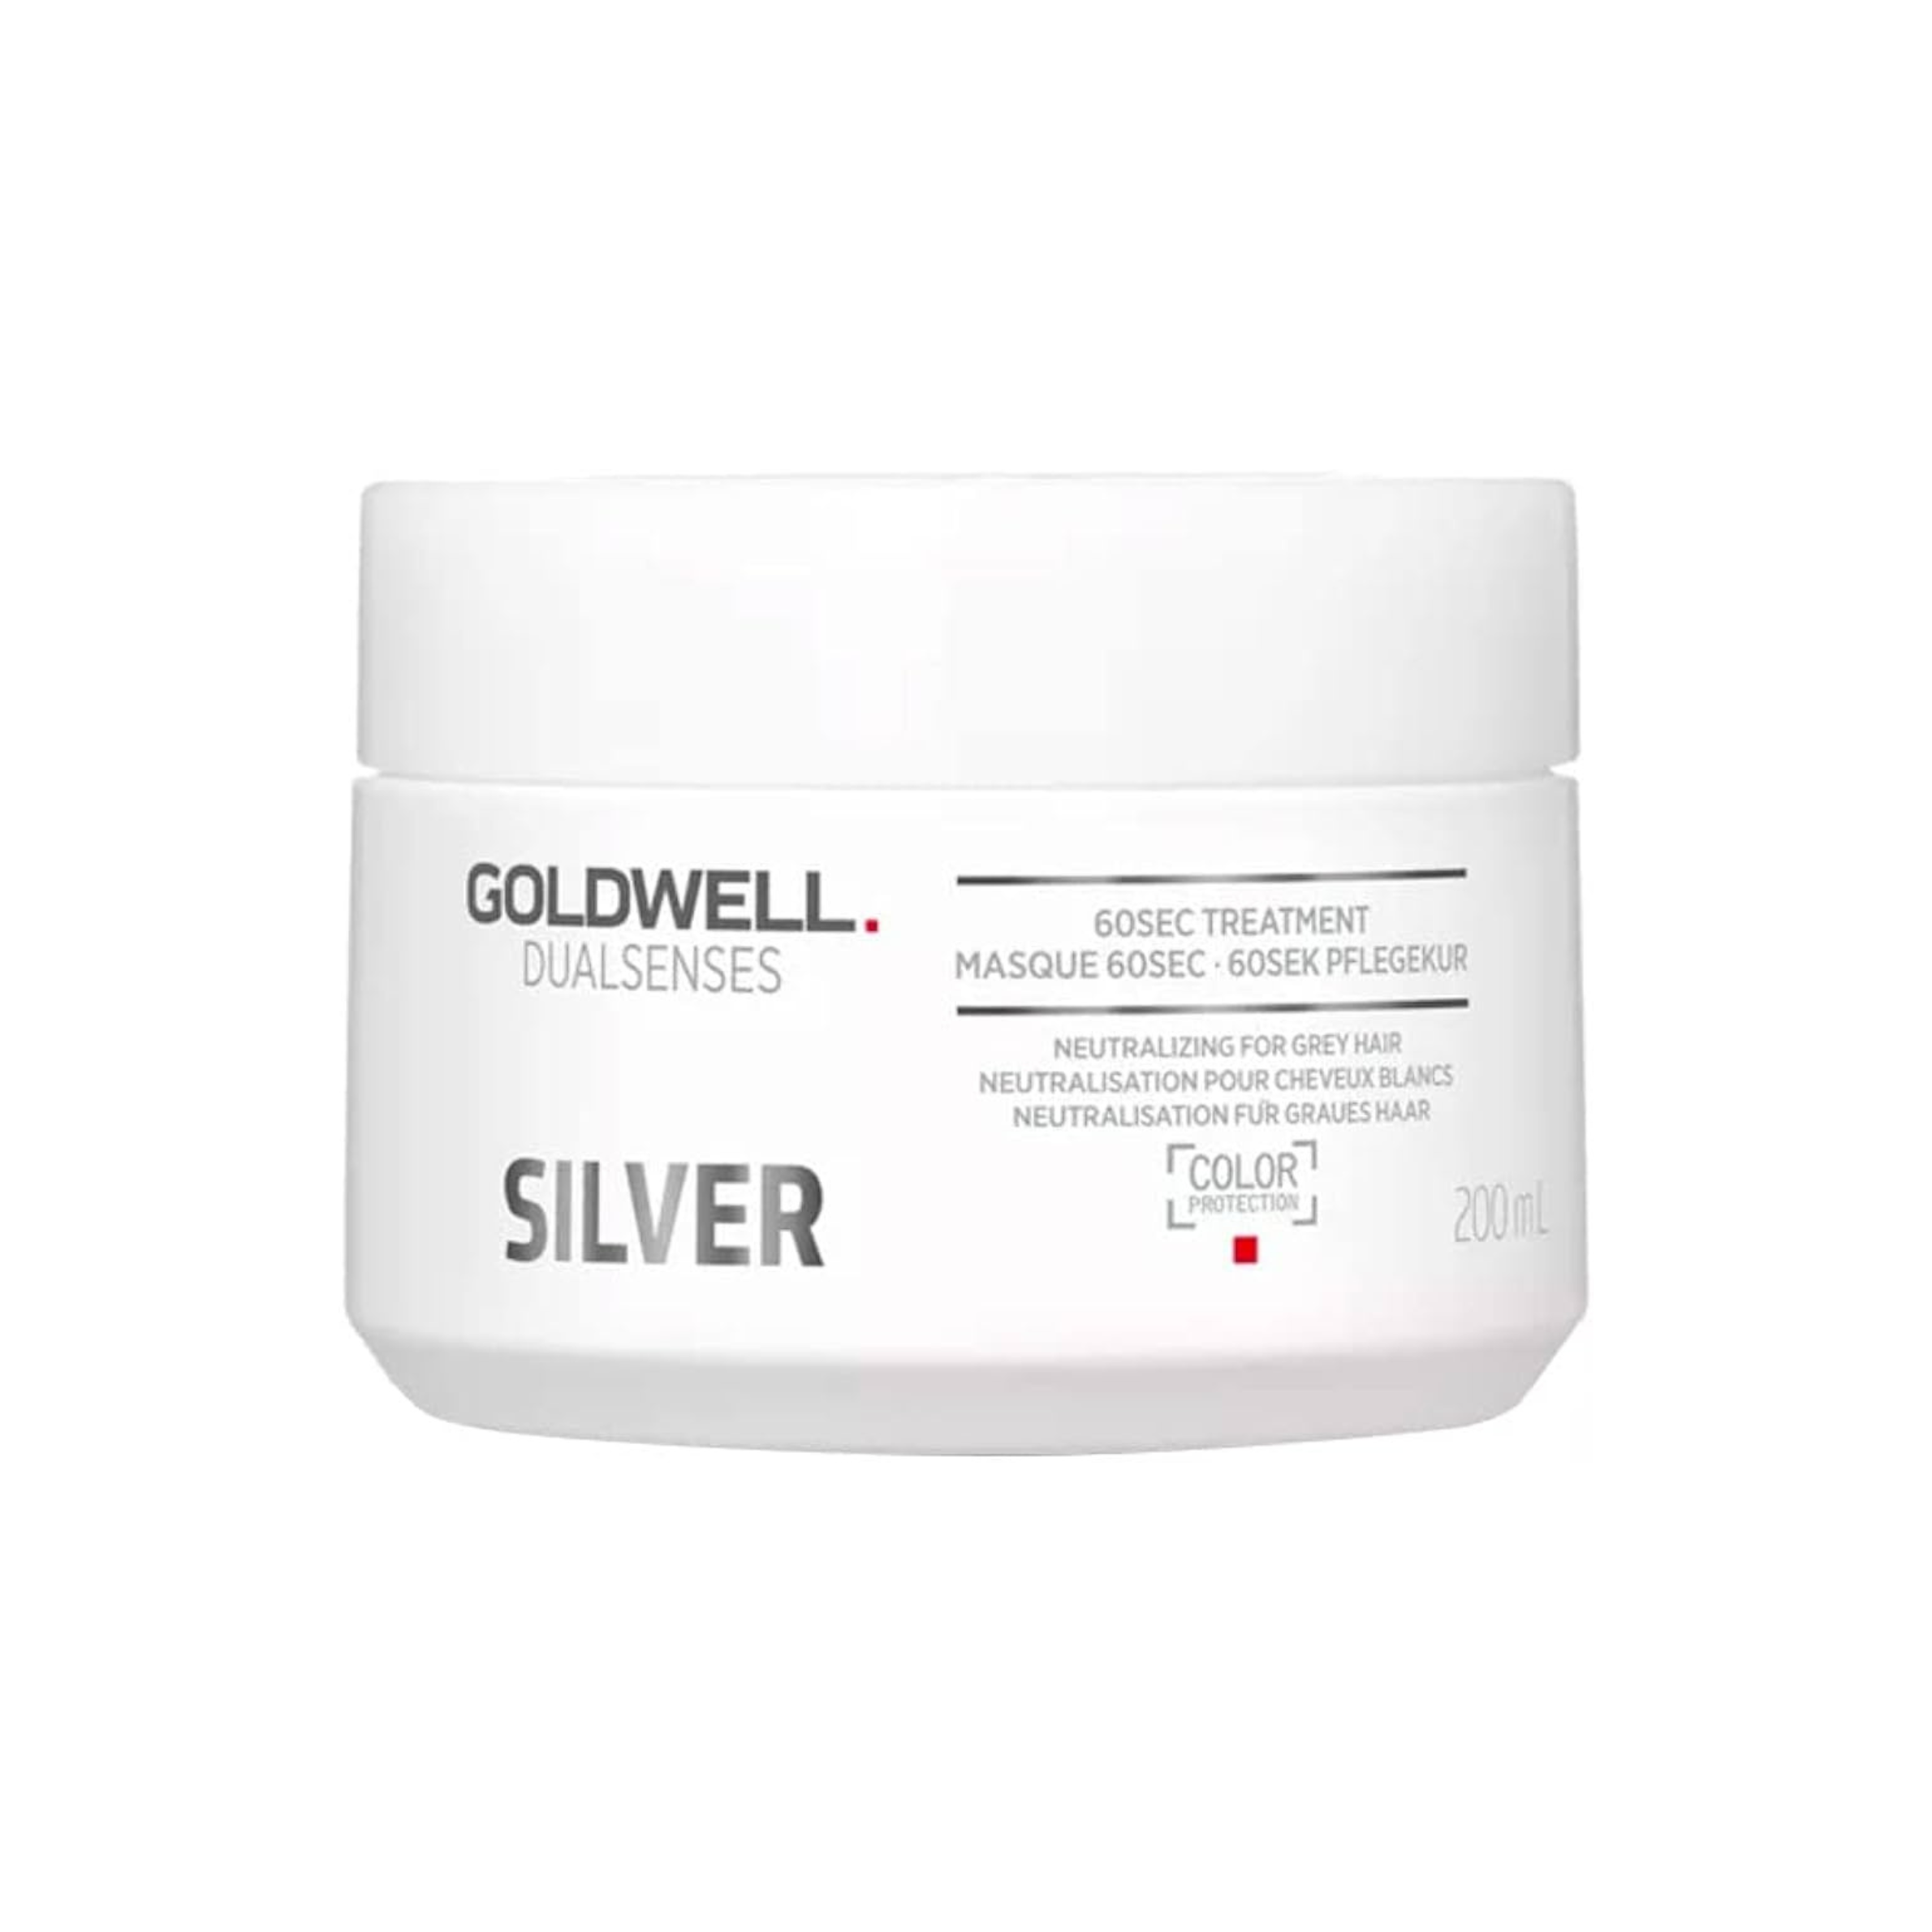 Goldwell Silver 60 Second Treatment